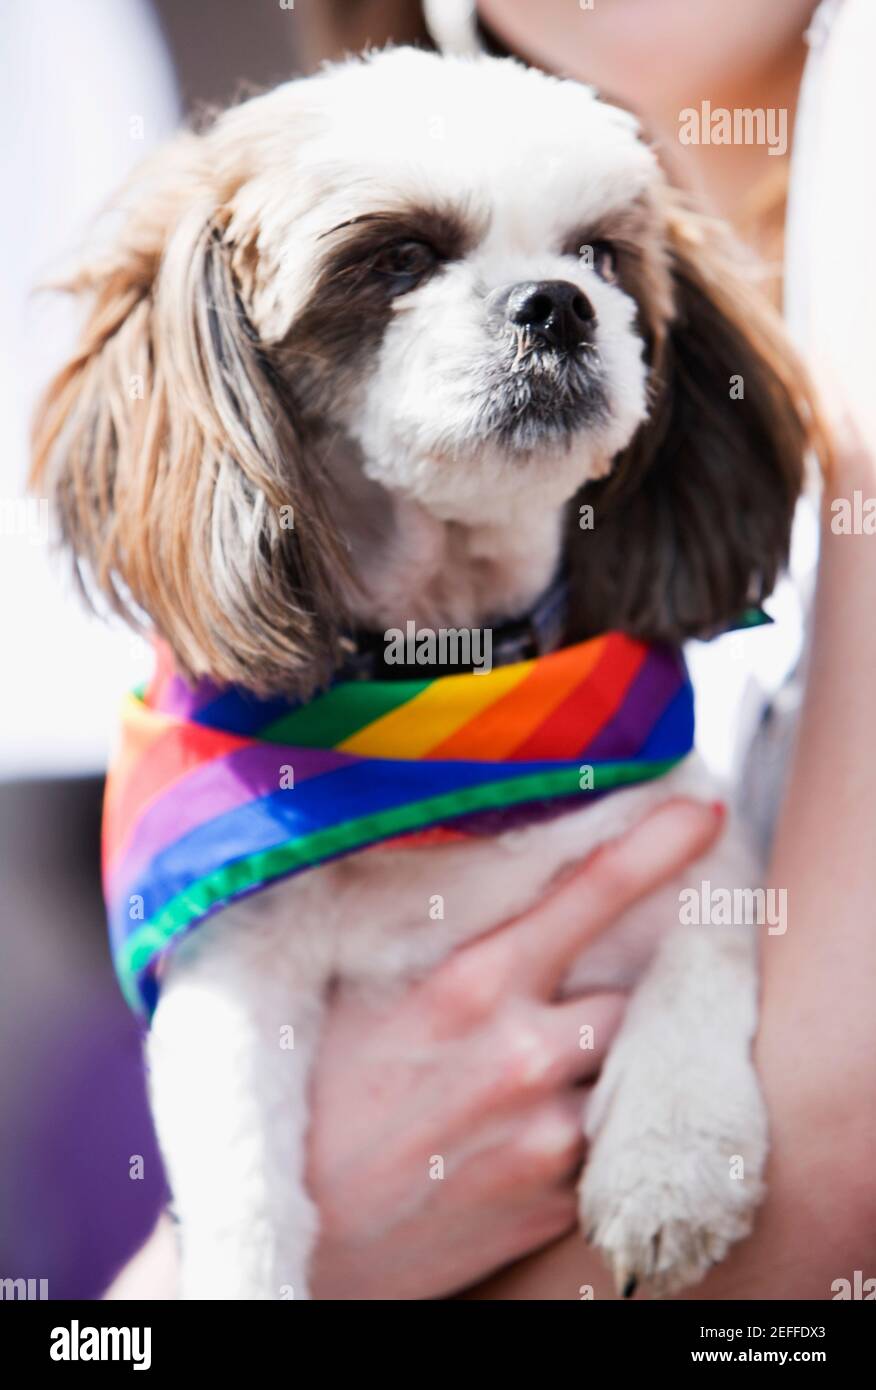 Close-up of a personÅ½s hand holding a puppy wearing a gay pride flag Stock Photo